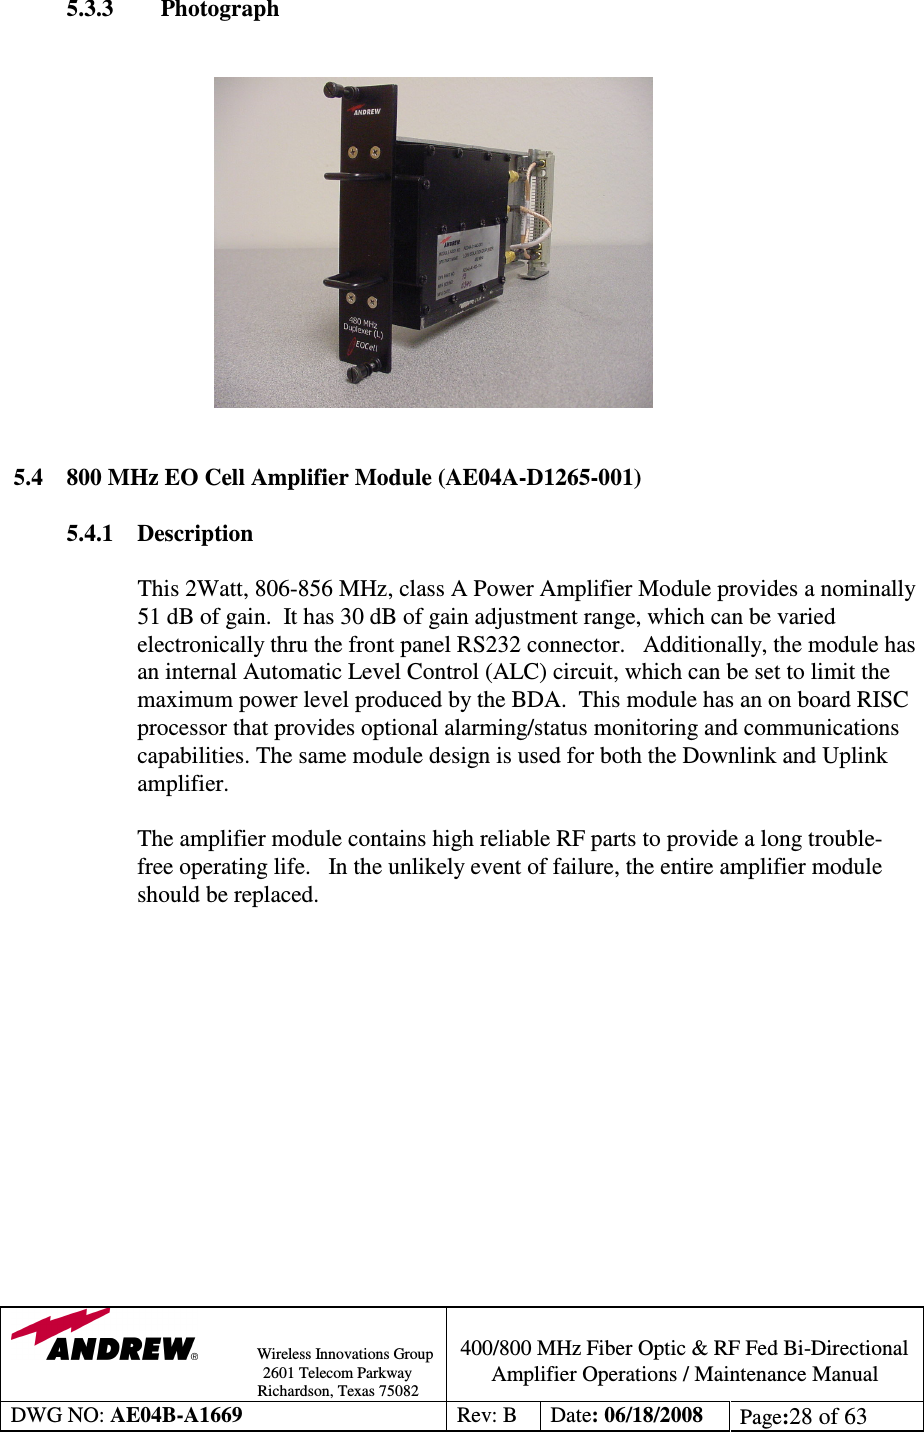                Wireless Innovations Group                                                                                        2601 Telecom Parkway                                                         Richardson, Texas 75082  400/800 MHz Fiber Optic &amp; RF Fed Bi-Directional Amplifier Operations / Maintenance Manual DWG NO: AE04B-A1669  Rev: B  Date: 06/18/2008  Page:28 of 63  5.3.3        Photograph                                            5.4  800 MHz EO Cell Amplifier Module (AE04A-D1265-001)  5.4.1  Description  This 2Watt, 806-856 MHz, class A Power Amplifier Module provides a nominally 51 dB of gain.  It has 30 dB of gain adjustment range, which can be varied electronically thru the front panel RS232 connector.   Additionally, the module has an internal Automatic Level Control (ALC) circuit, which can be set to limit the maximum power level produced by the BDA.  This module has an on board RISC processor that provides optional alarming/status monitoring and communications capabilities. The same module design is used for both the Downlink and Uplink amplifier.     The amplifier module contains high reliable RF parts to provide a long trouble-free operating life.   In the unlikely event of failure, the entire amplifier module should be replaced.                 